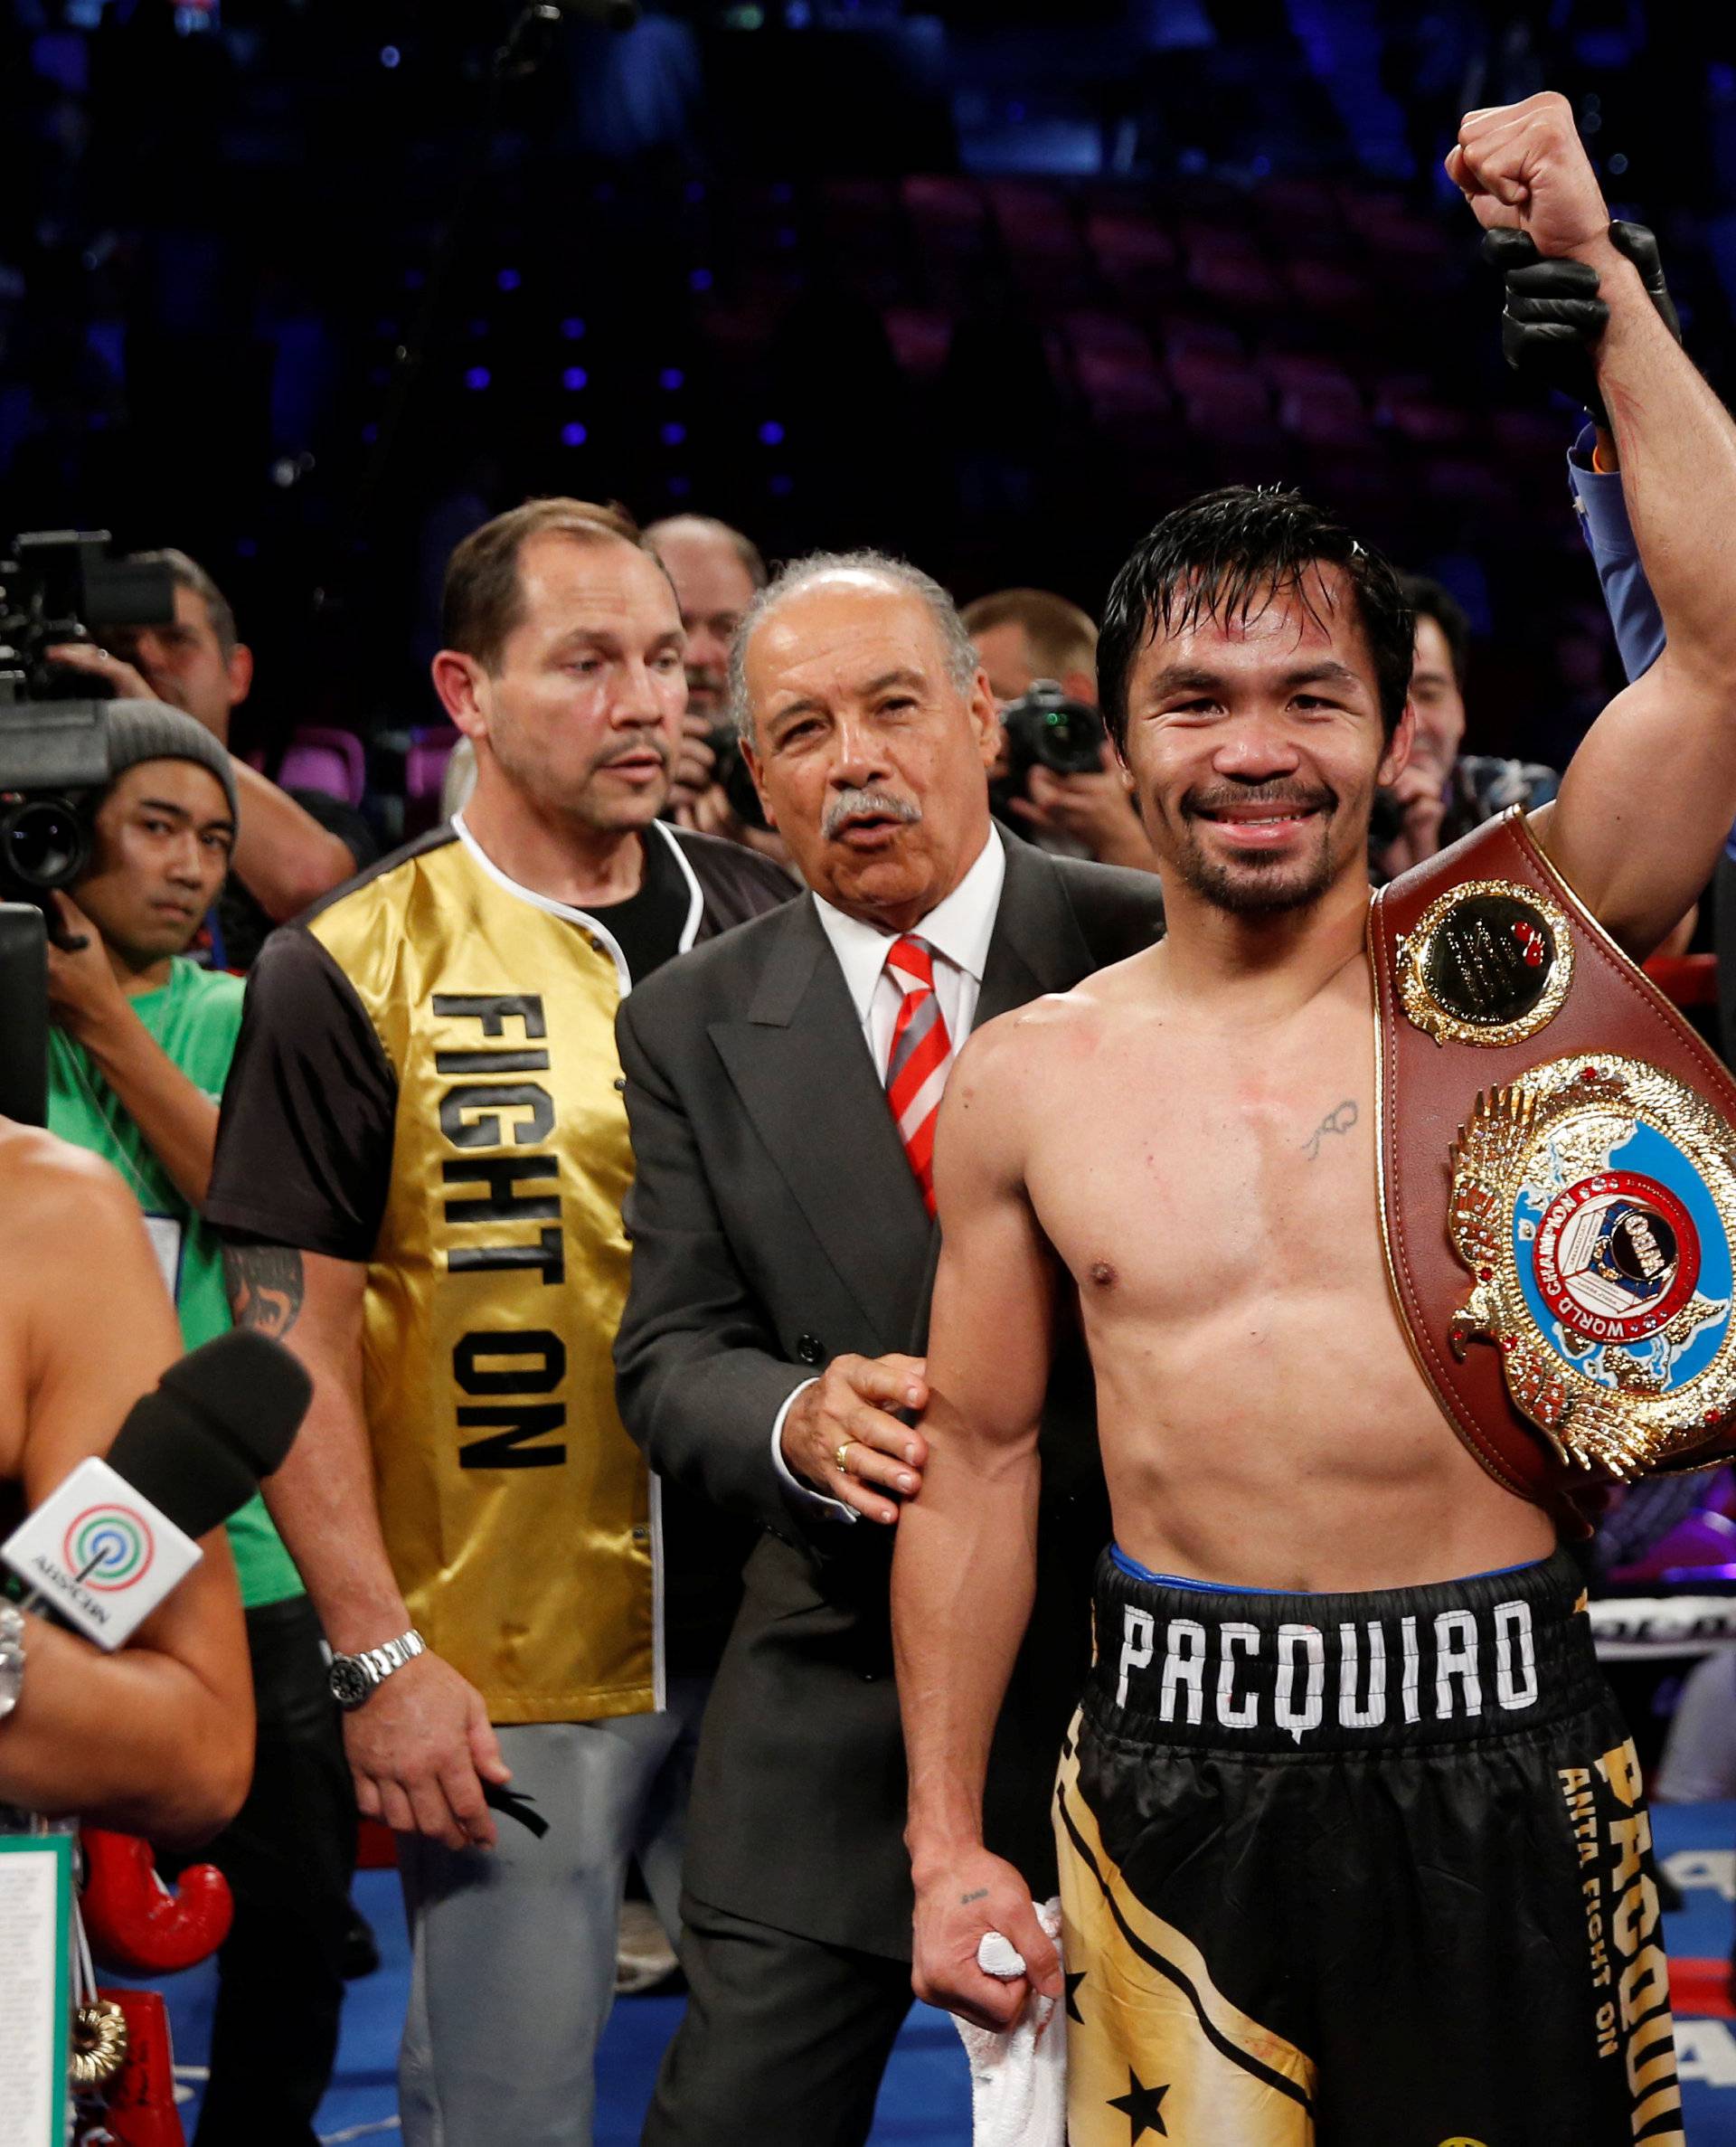 Manny Pacquiao celebrates his victory over Jessie Vargas following their title fight at the Thomas & Mack Center in Las Vegas